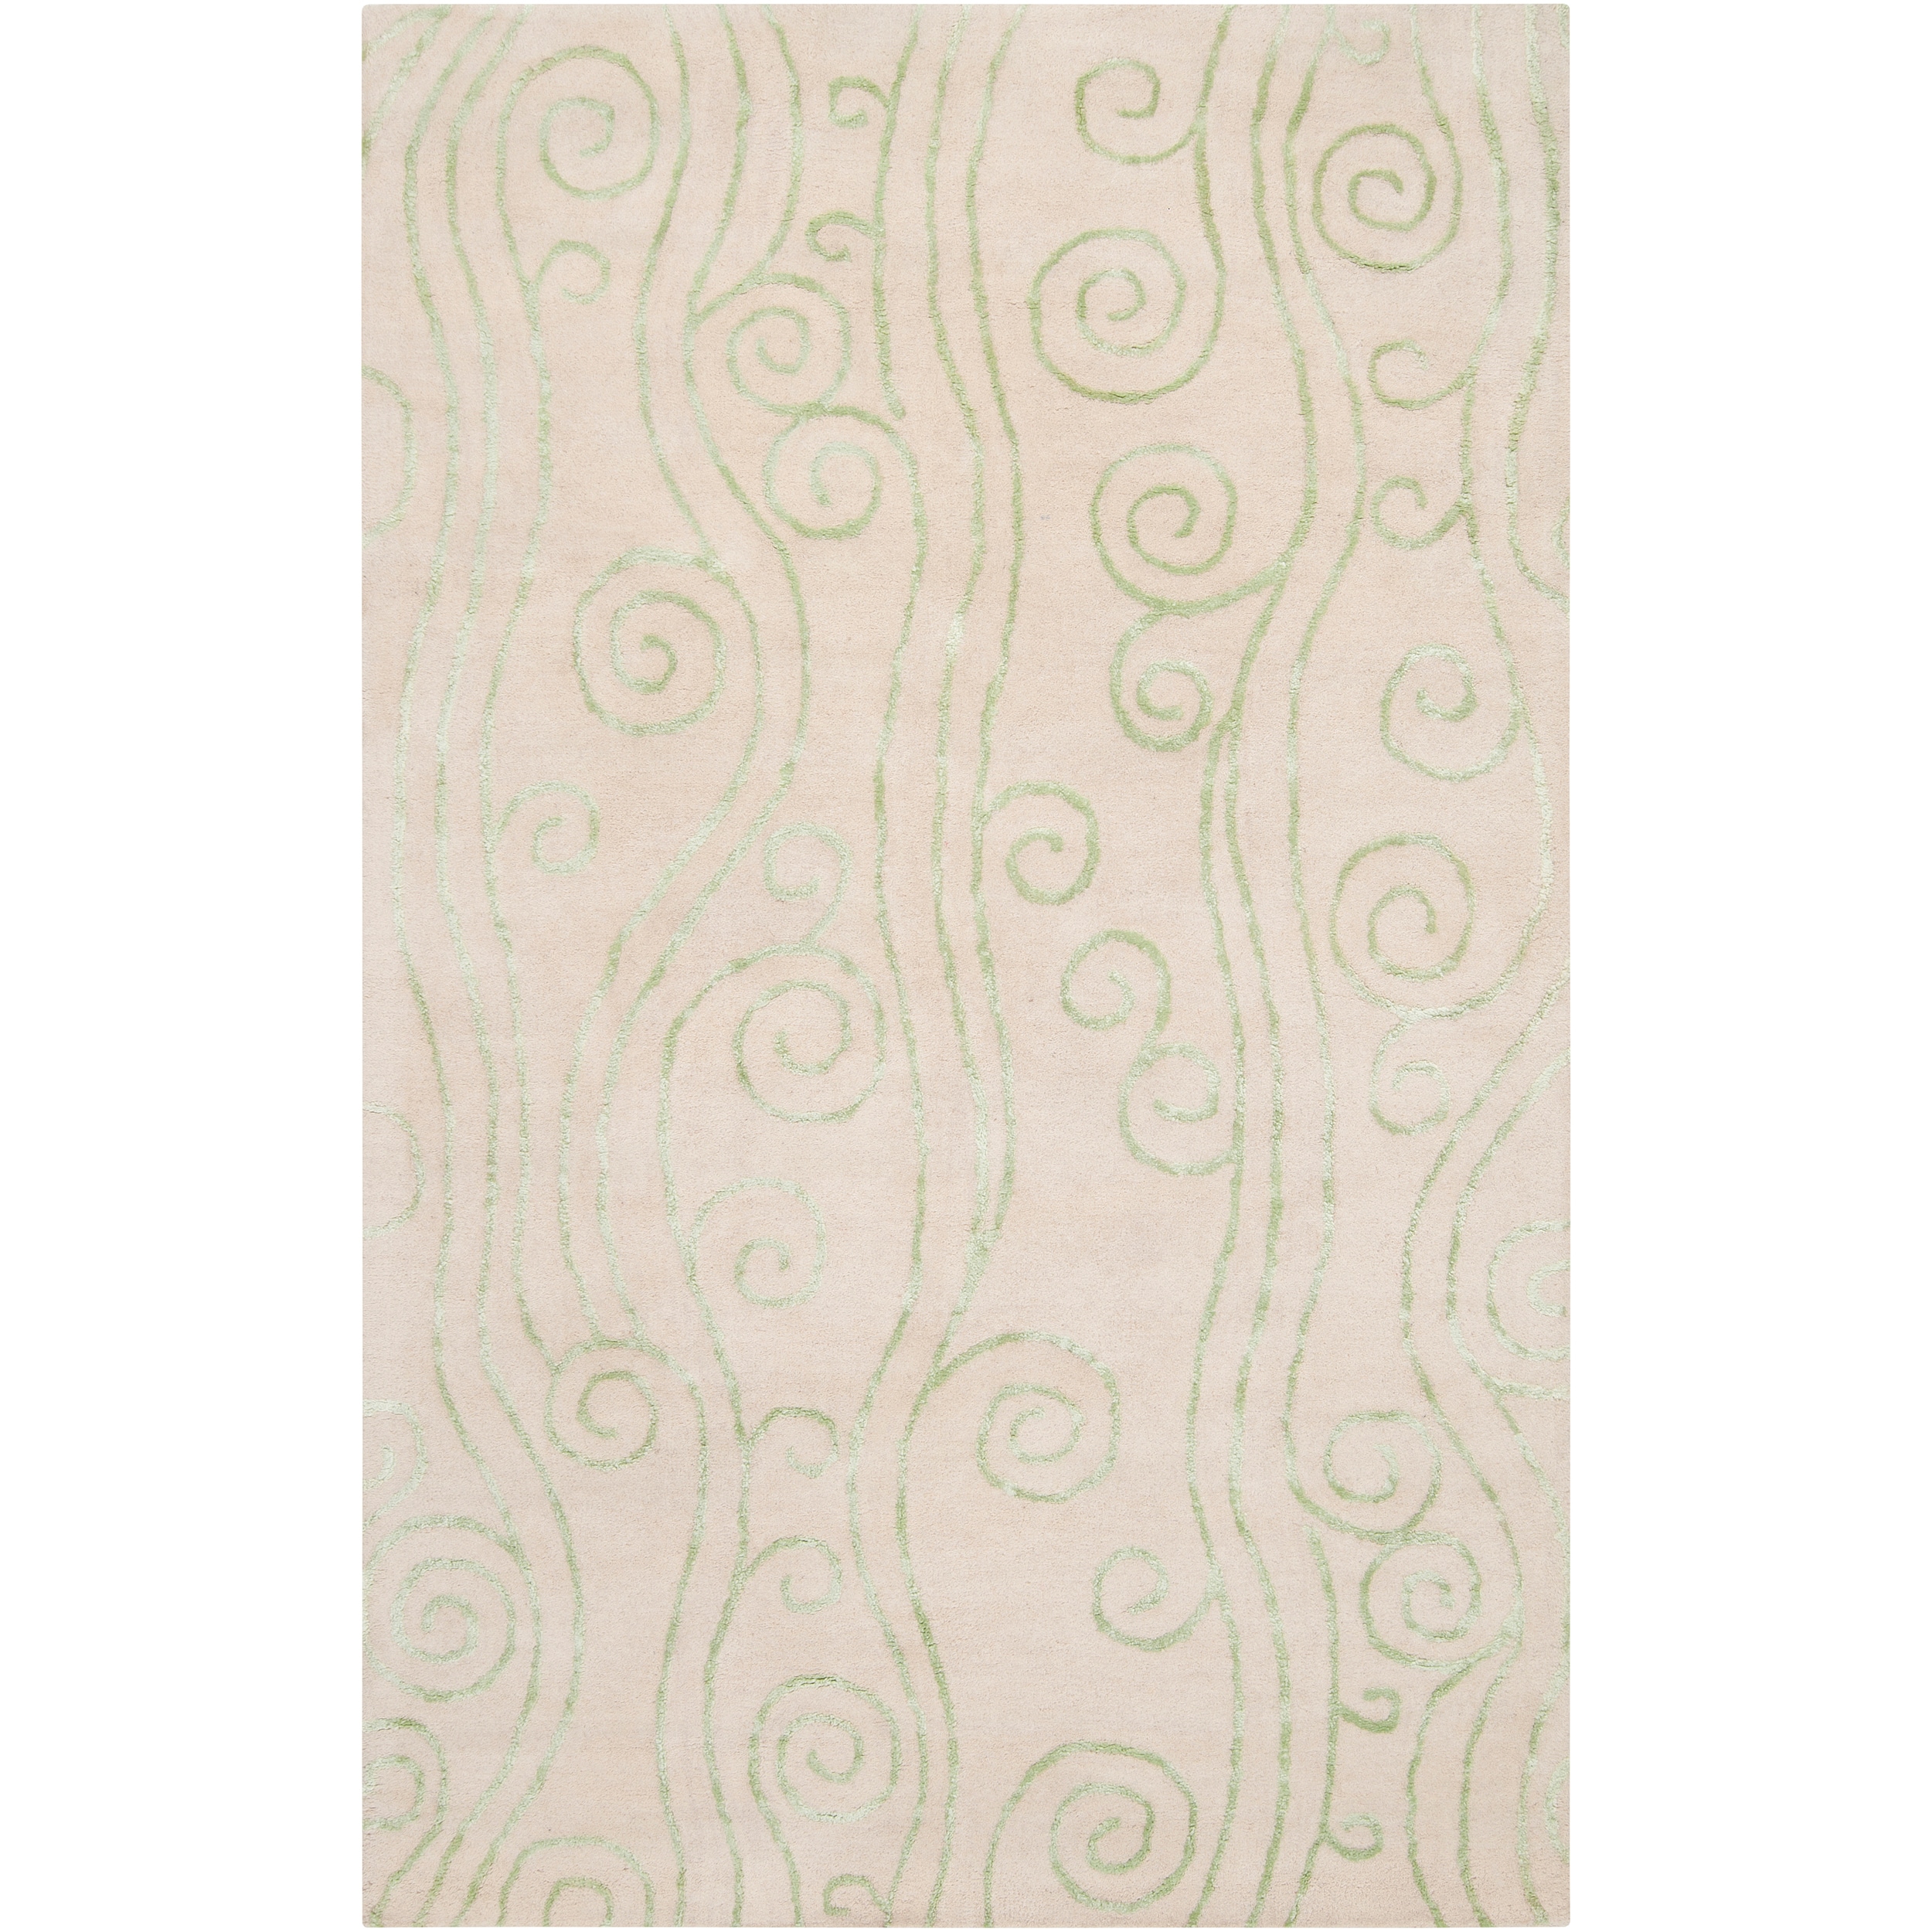 Abstract Somerset Bay Hand tufted Bacelot Bay Green Beach Inspired Wool Rug (8 X 11)